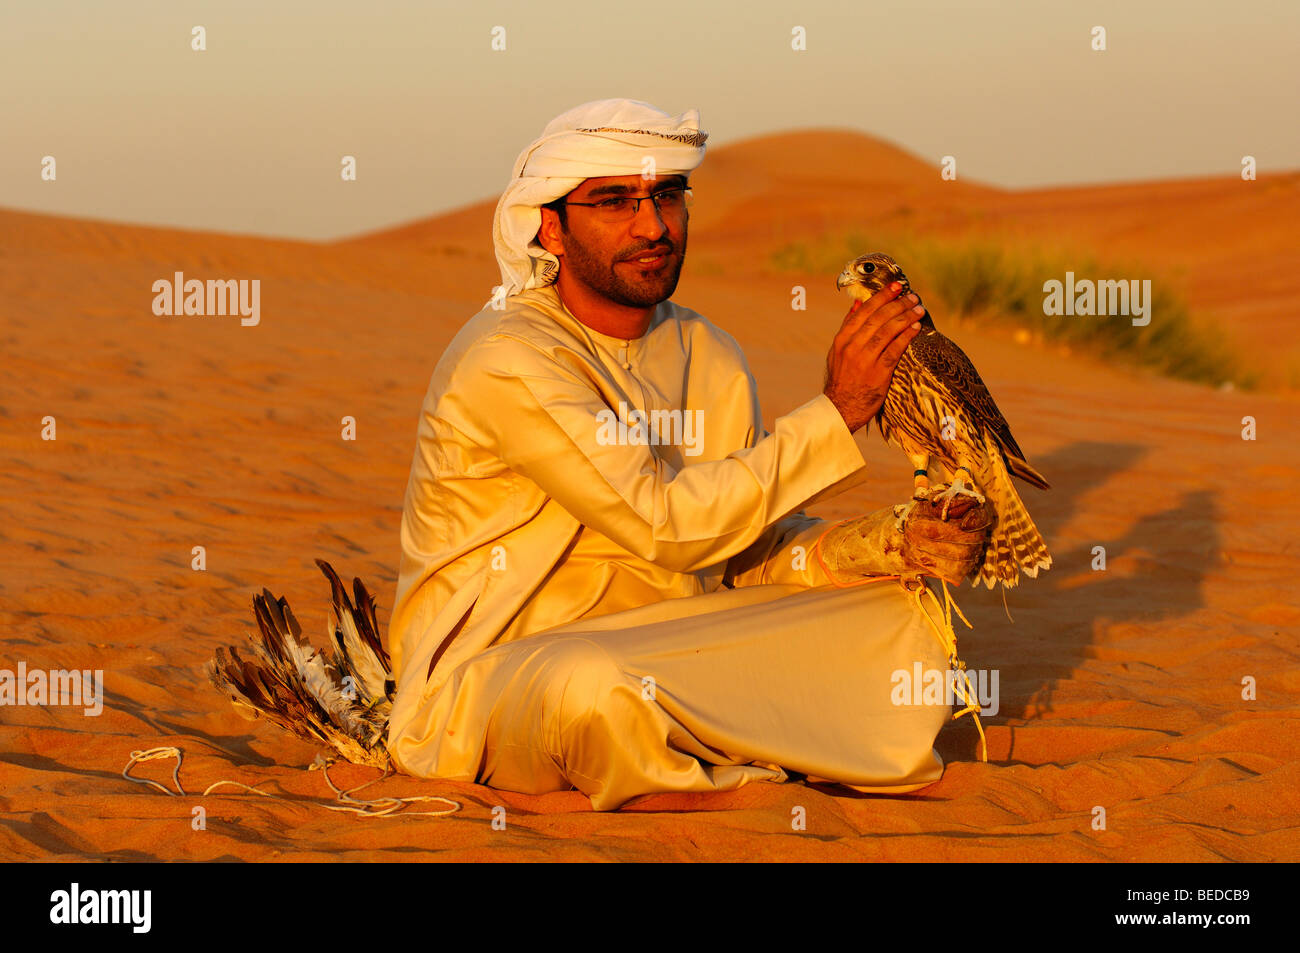 Arab falconer sitting in the desert sand with his falcon, Dubai, United Arab Emirates, Middle East Stock Photo